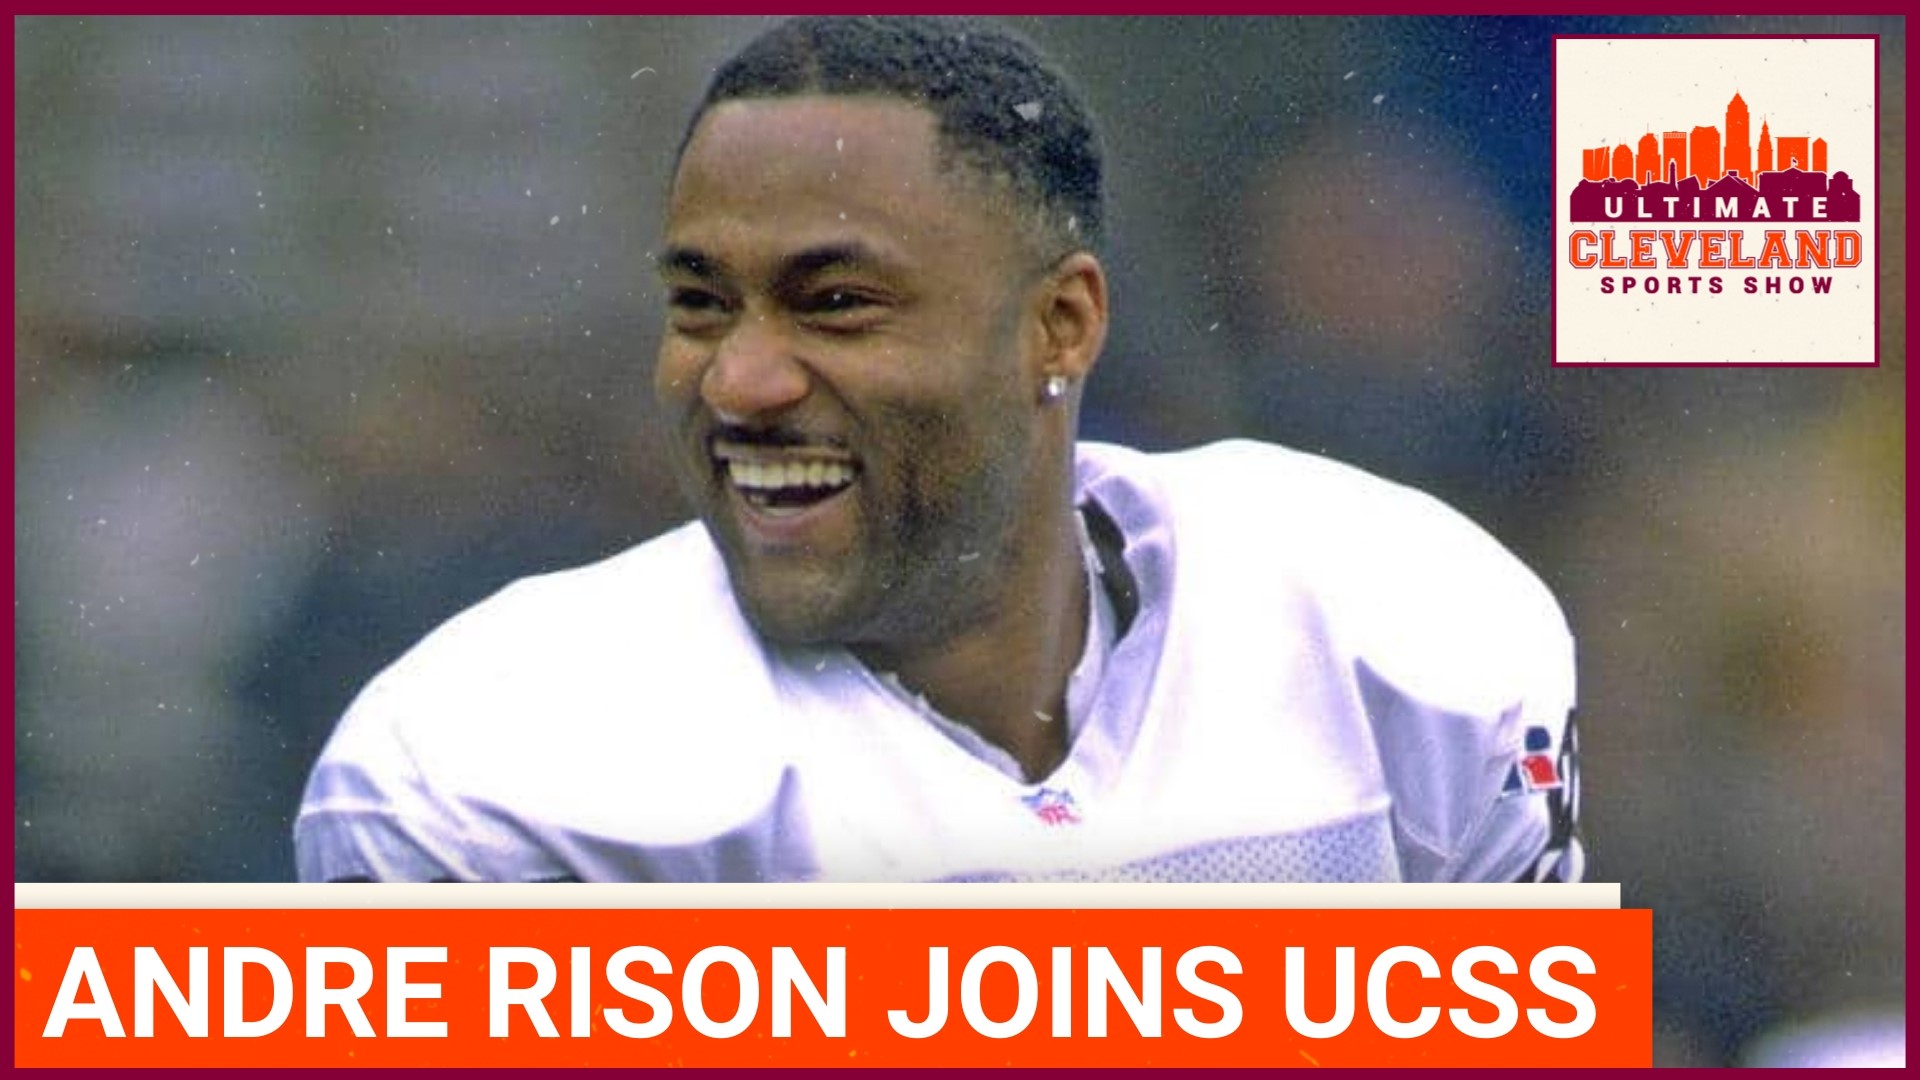 Former Cleveland Browns WR Andre Rison joins UCSS